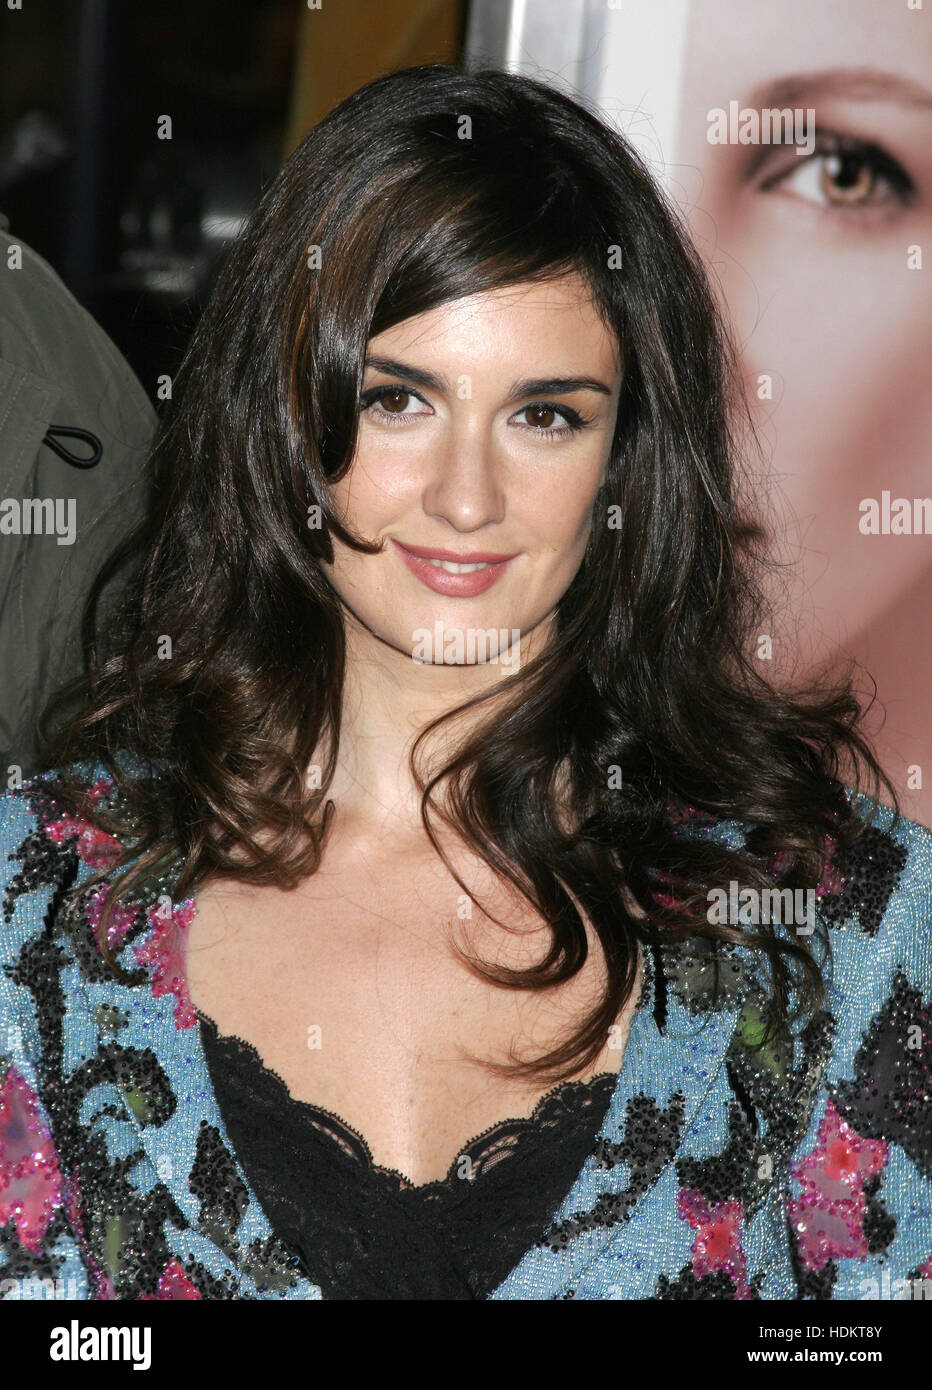 Spanish actress Paz Vega at the premiere of the film, 'Closer' at Mann Village theatre on November 22, 2004 in Los Angeles. Photo credit: Francis Specker Stock Photo